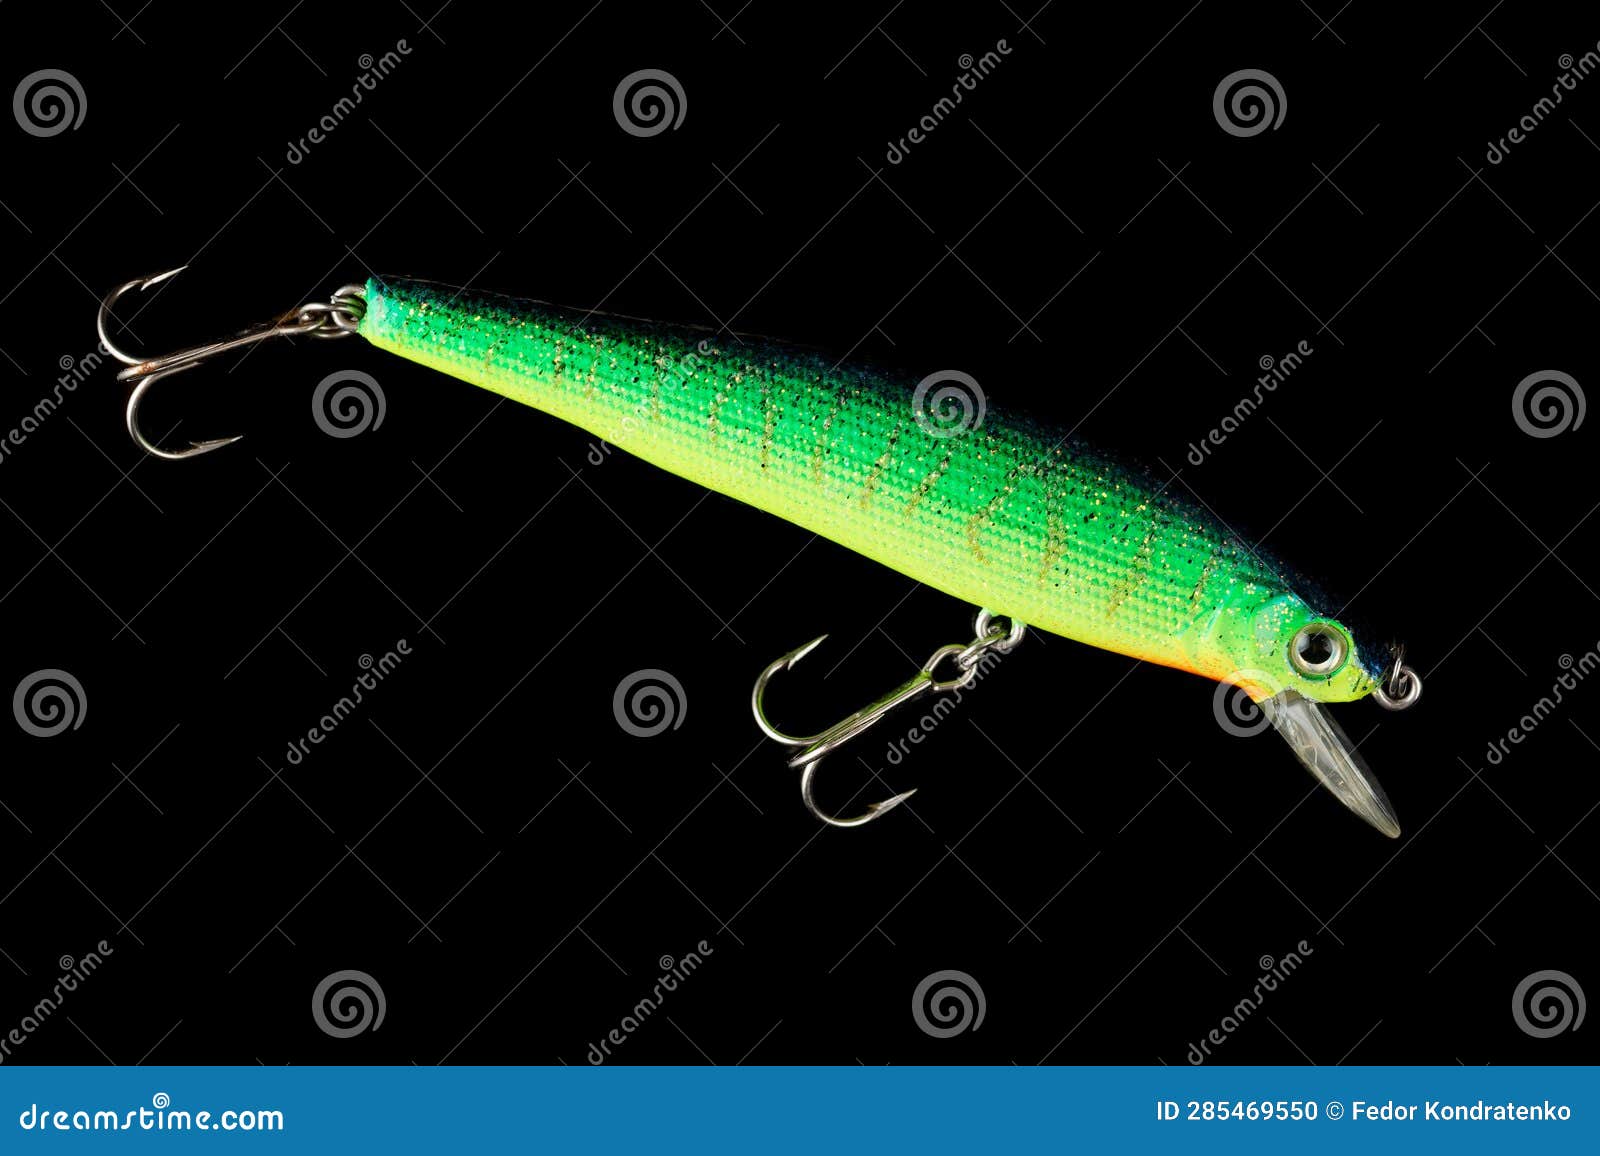 Bright Green Minnow Plastic Fishing Lure Isolated on Black Stock